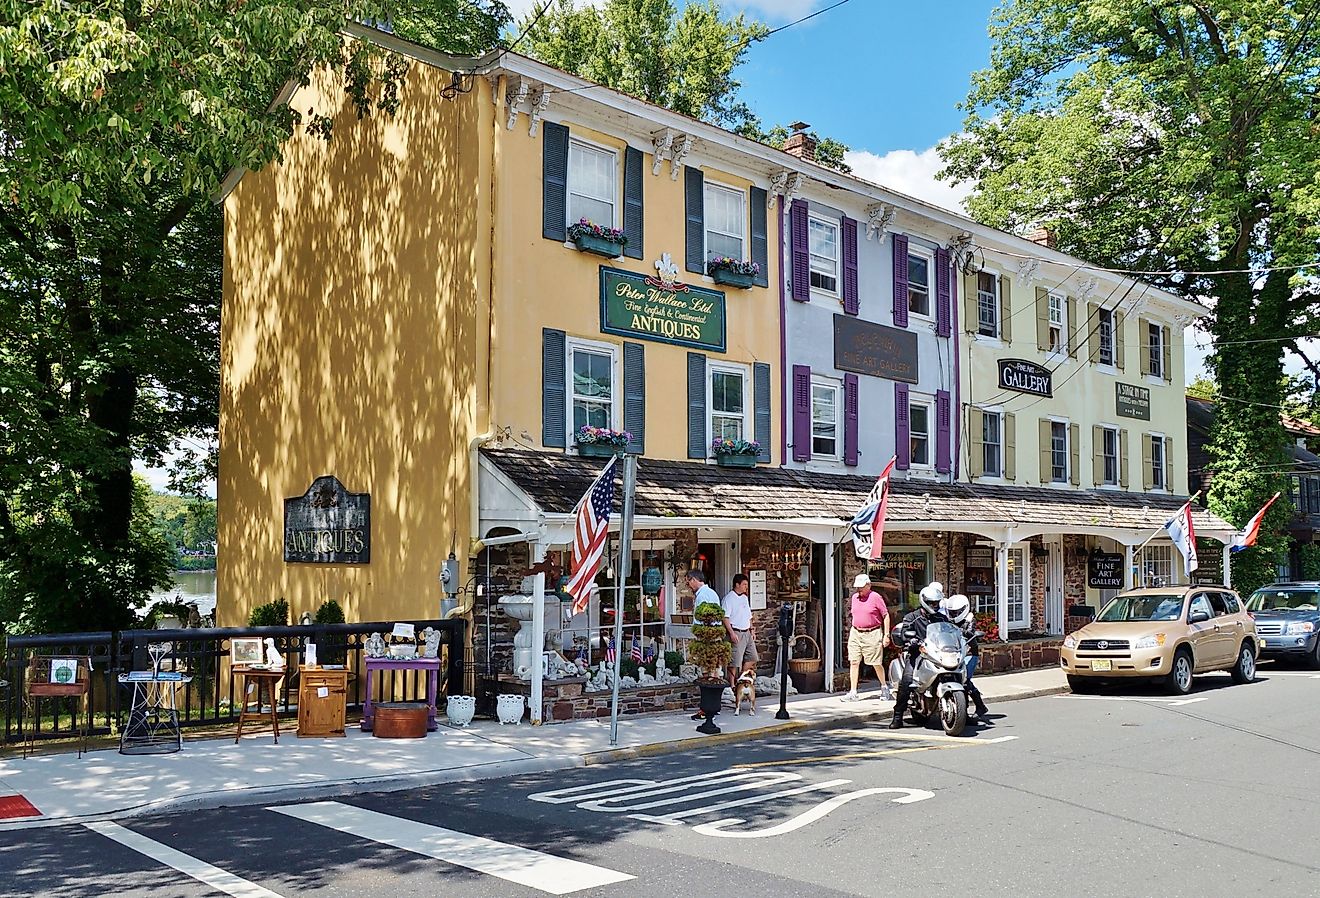 The charming historic town of Lambertville, located on the Delaware River. Image credit EQRoy via Shutterstock.